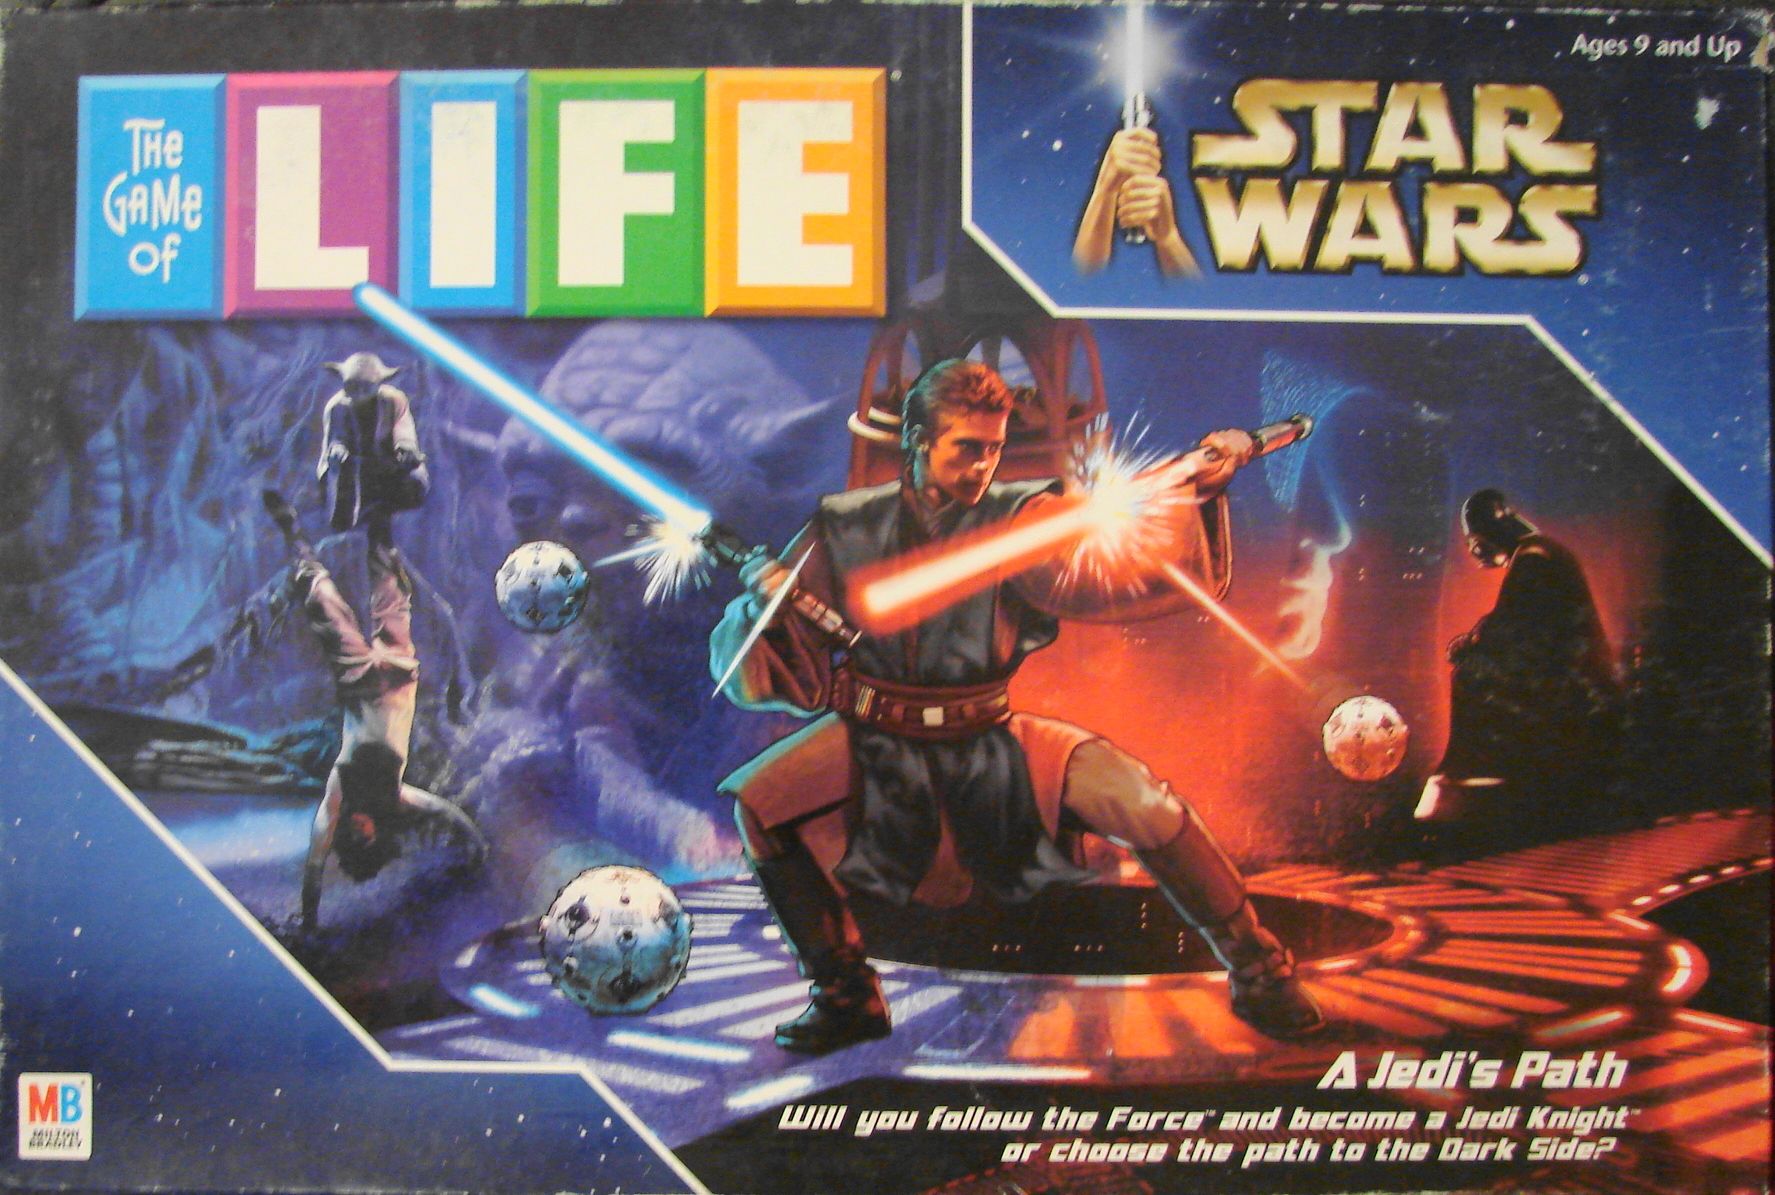 The Game of Life: A Jedi's Path